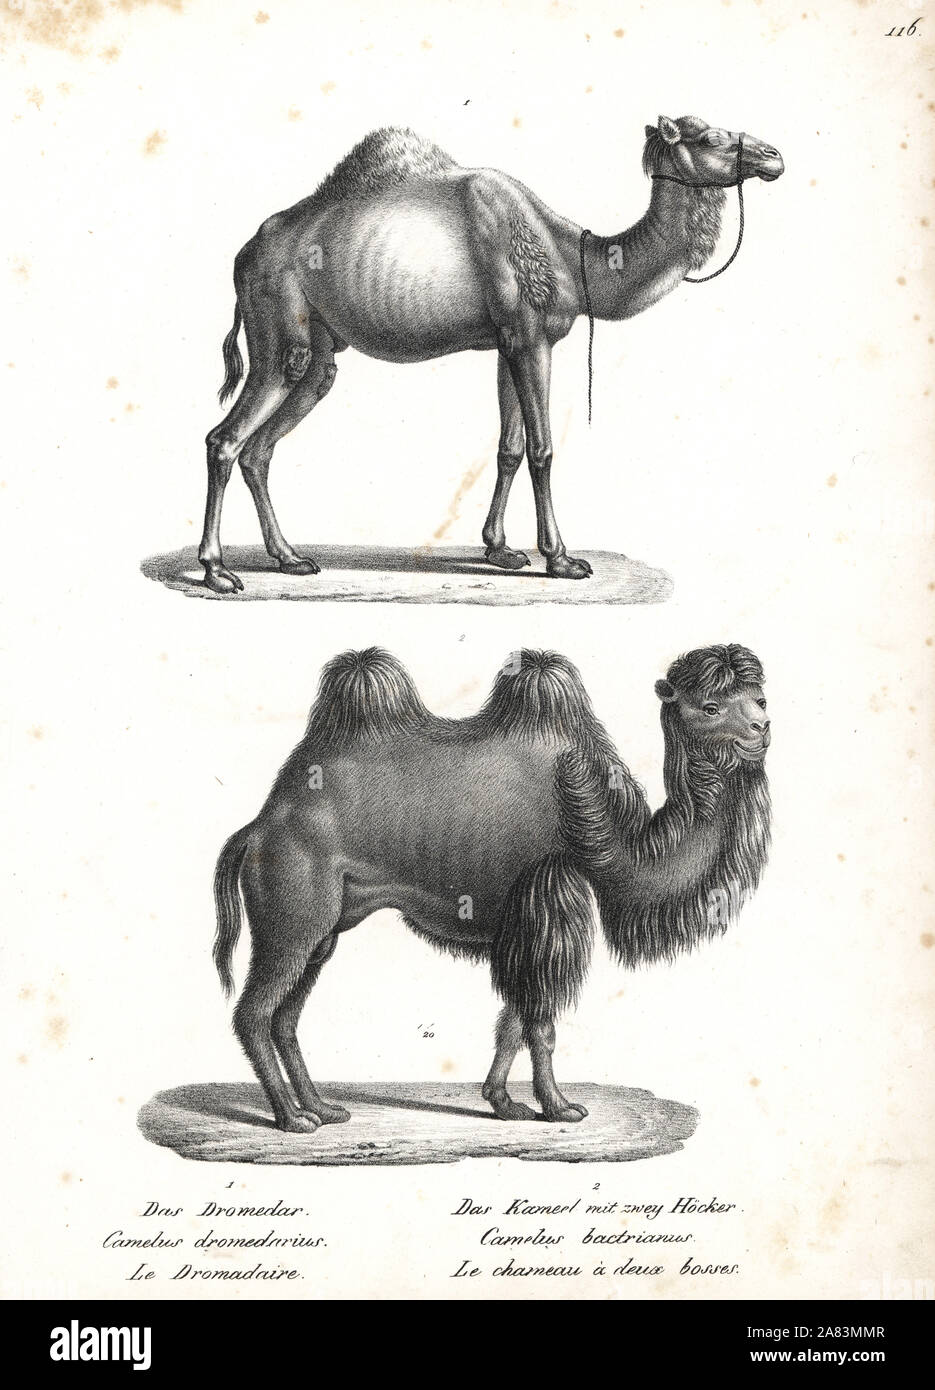 Dromedary, Camelus dromedarius, and Bactrian camel, Camelus bactrianus, critically endangered. Lithograph by Karl Joseph Brodtmann from Heinrich Rudolf Schinz's Illustrated Natural History of Men and Animals, 1836. Stock Photo